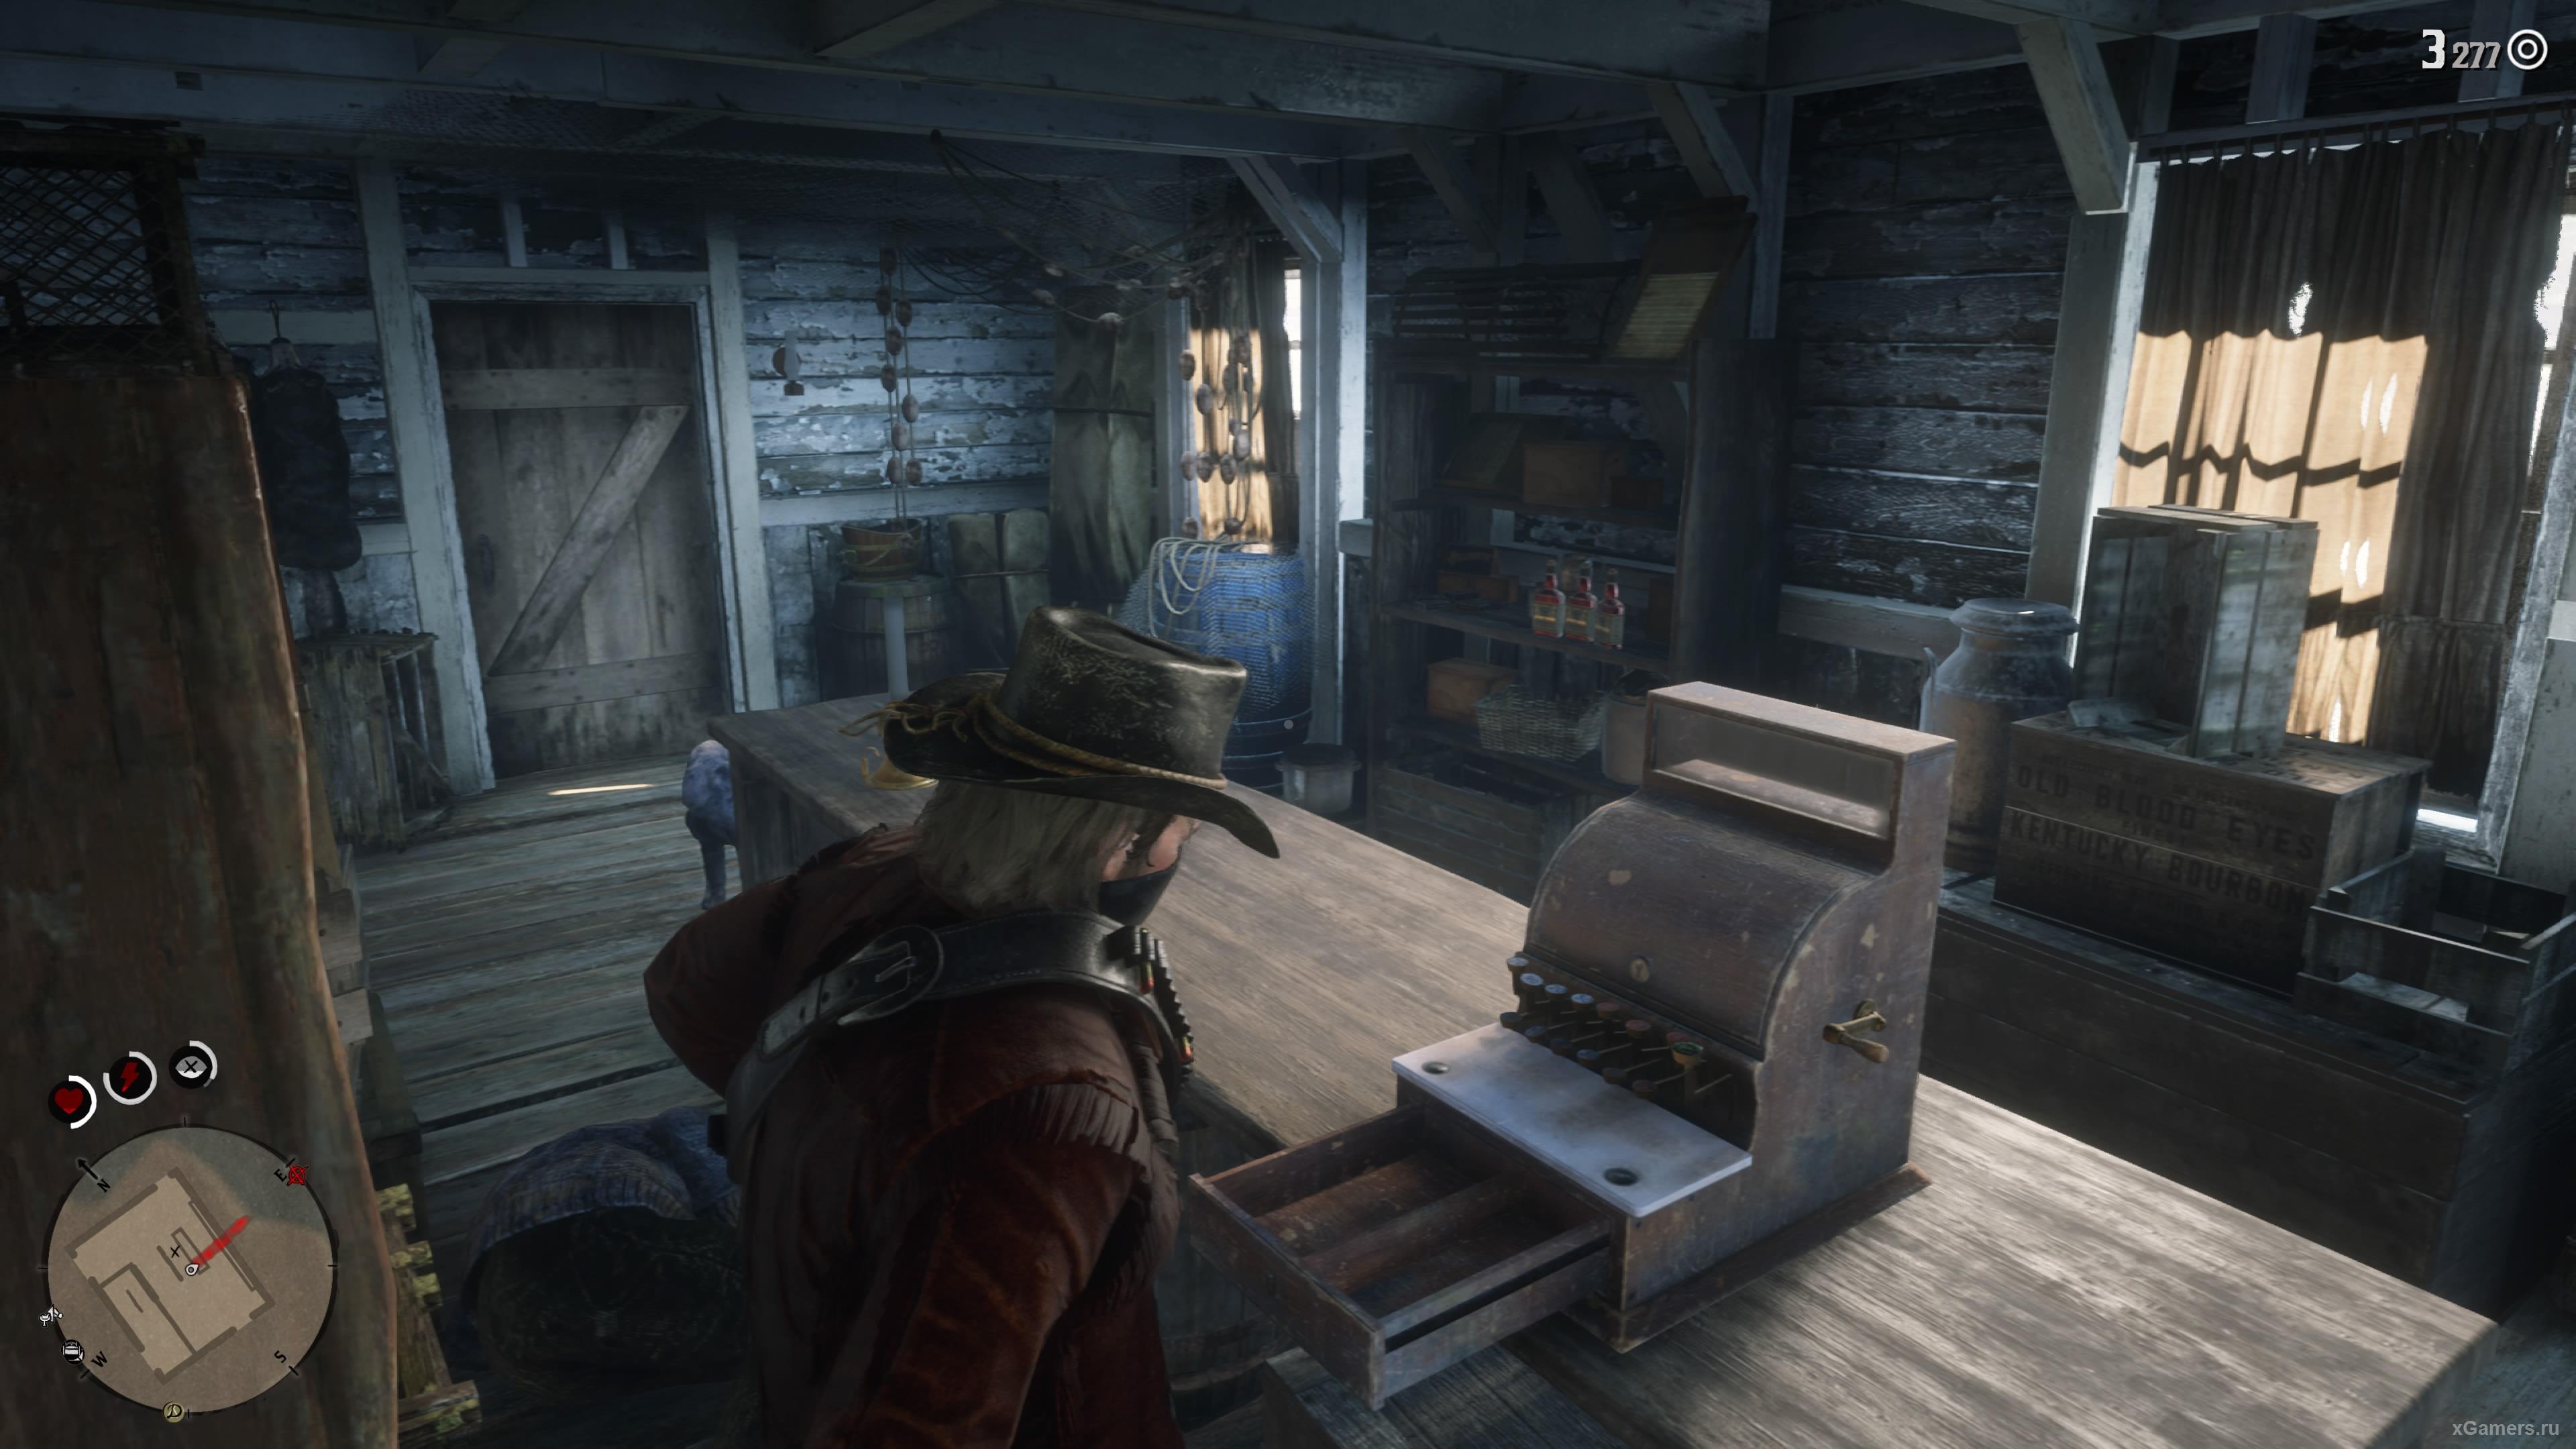 Robbery shop in the game RDR 2